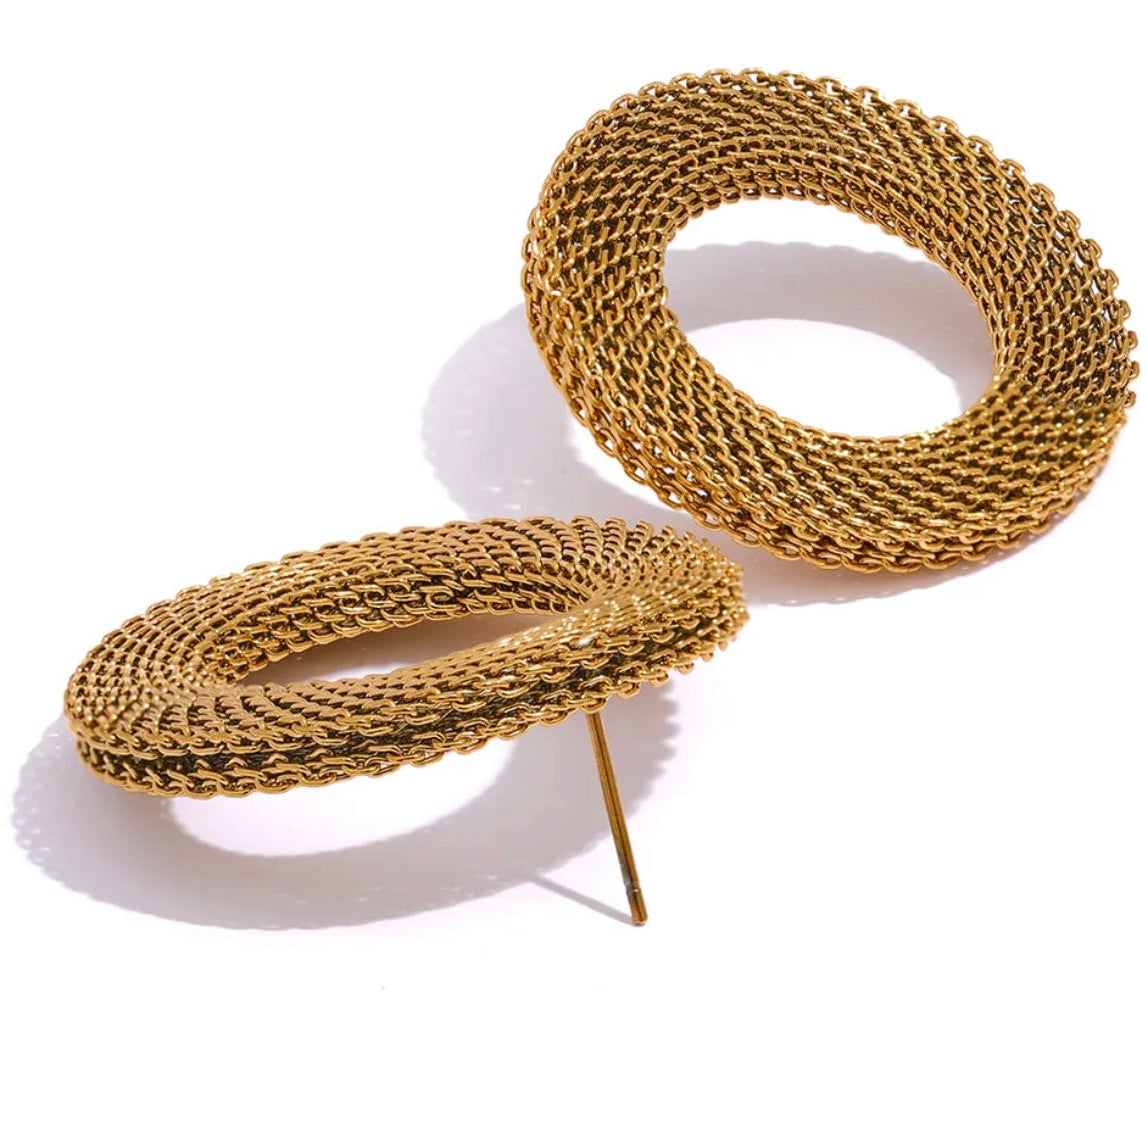 Sednna Gold Mesh Frontal Hoops